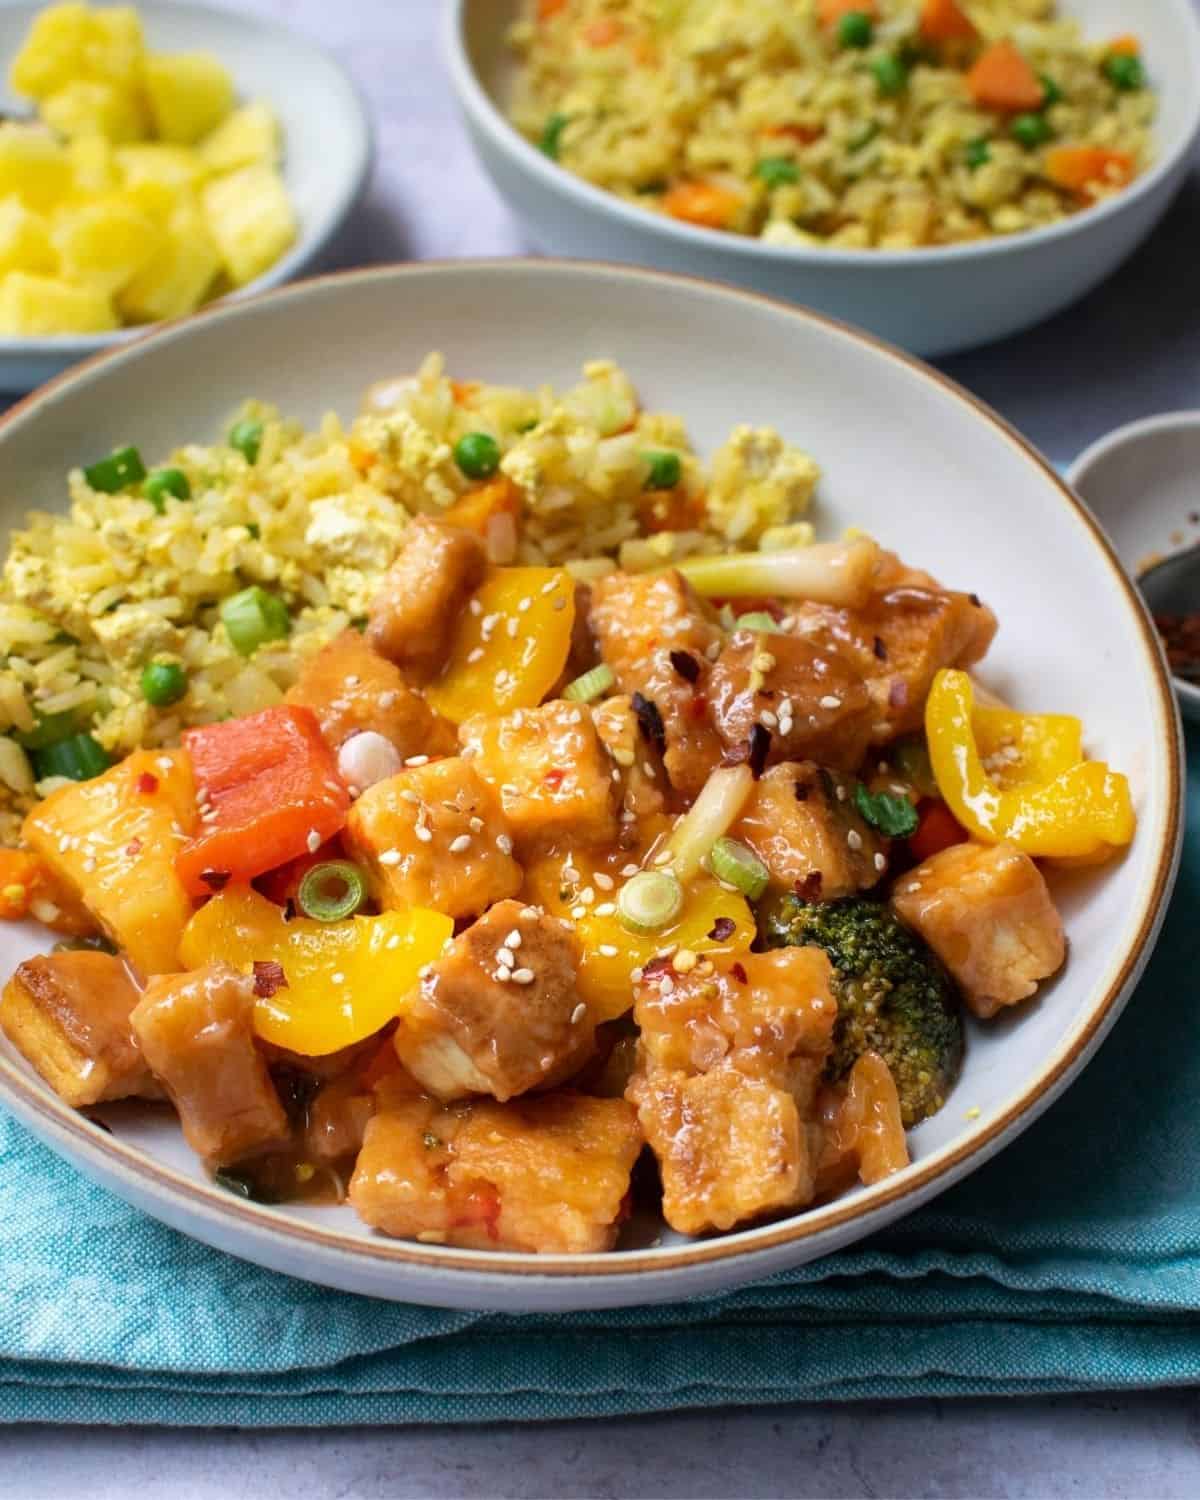 Tofu in vegan sweet and sour sauce served with fried rice. Other bowls visible behind it.